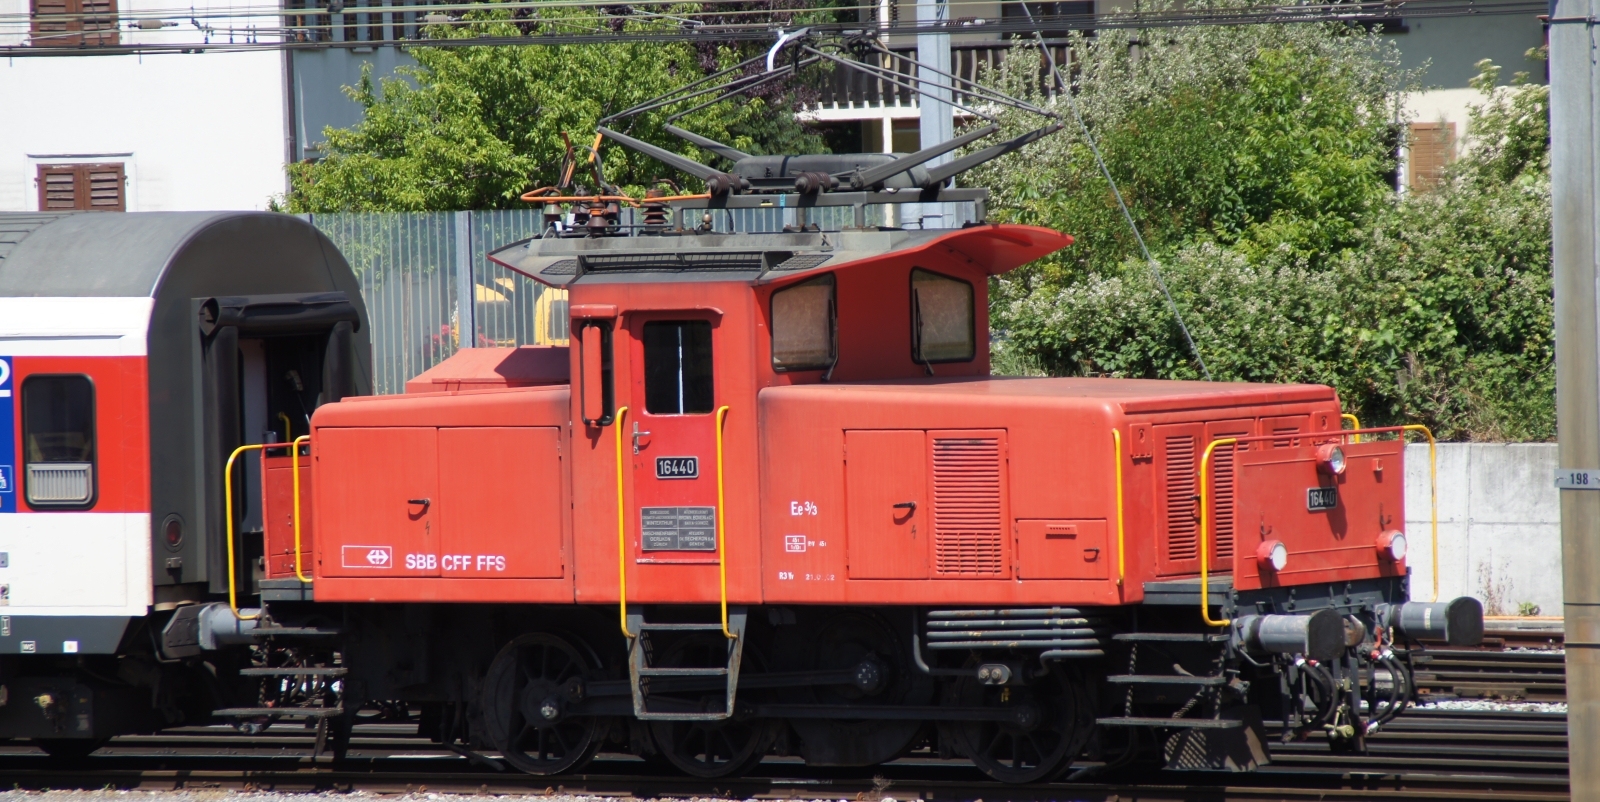 No. 16440 in June 2017 shunting a passenger train